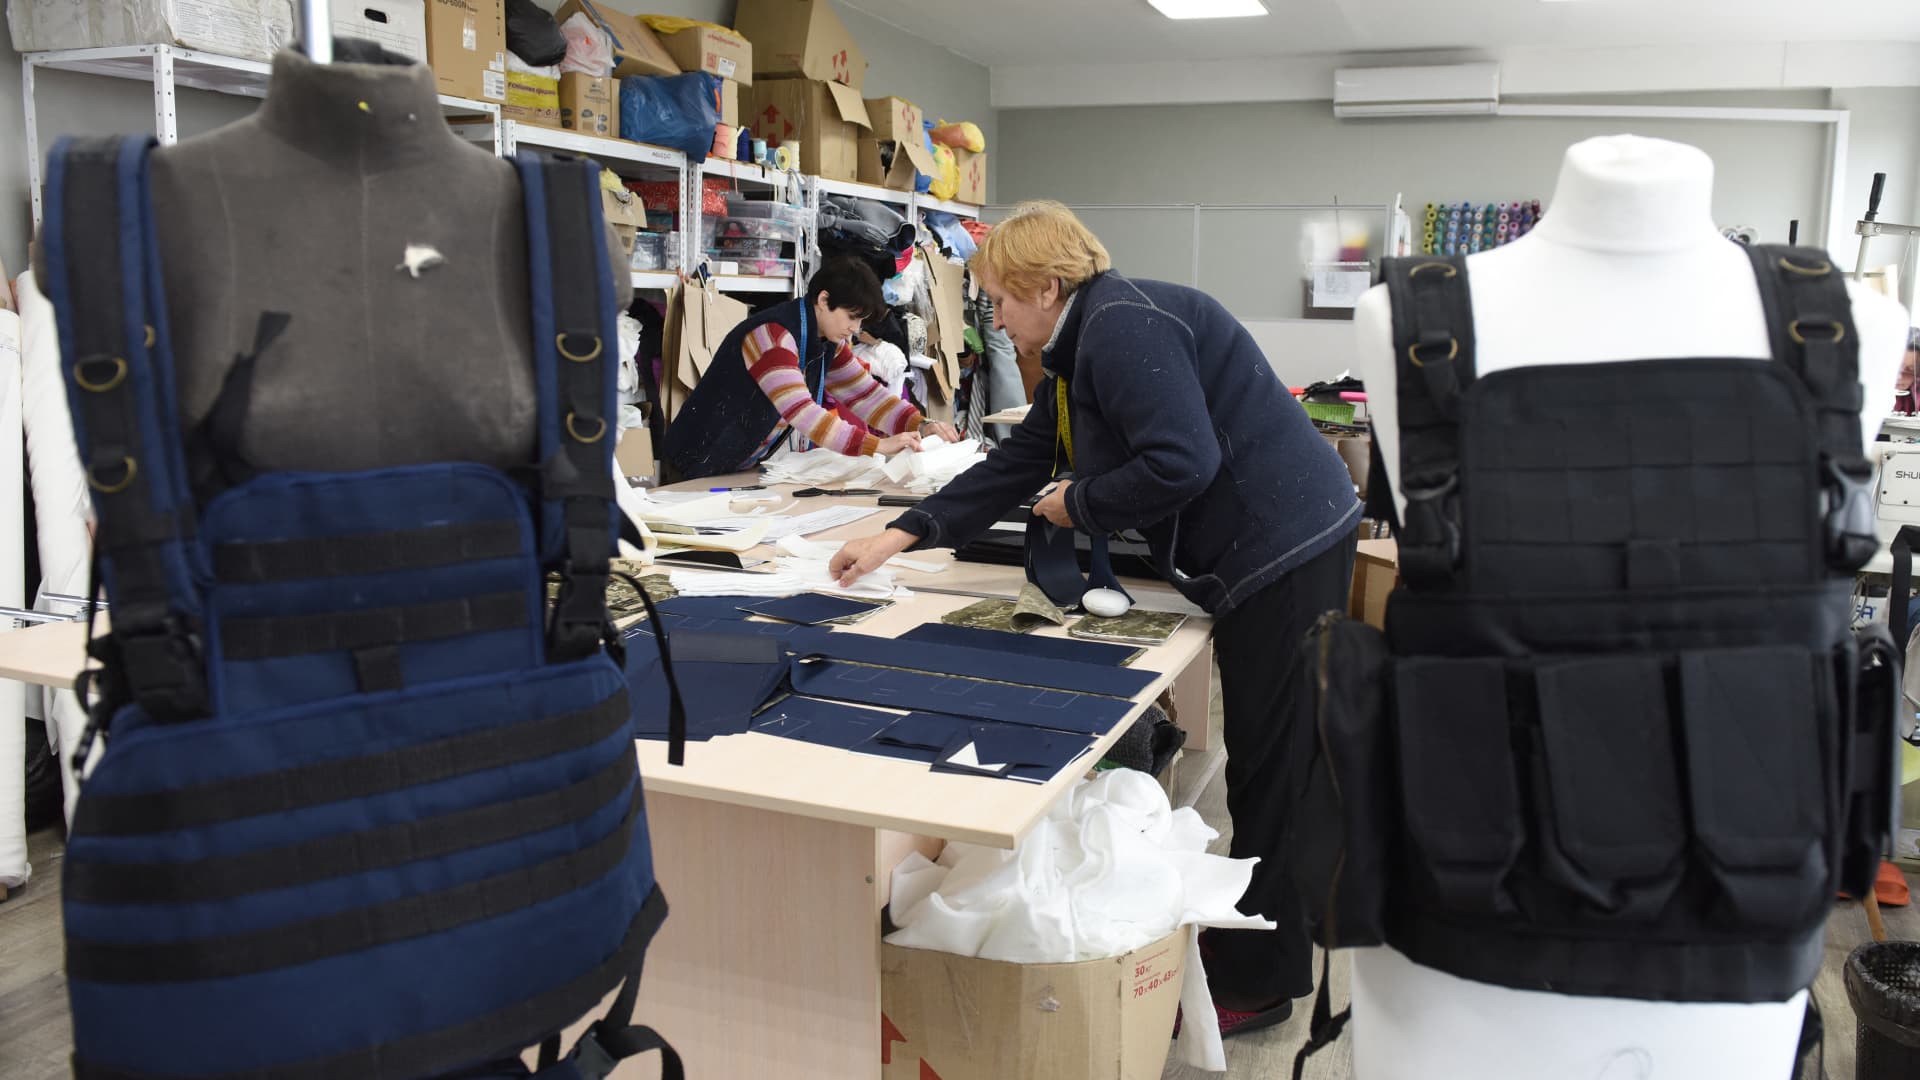 Volunteers sew tactical military vests for the Ukrainian army in the western Ukrainian city of Lviv on March 4, 2022.